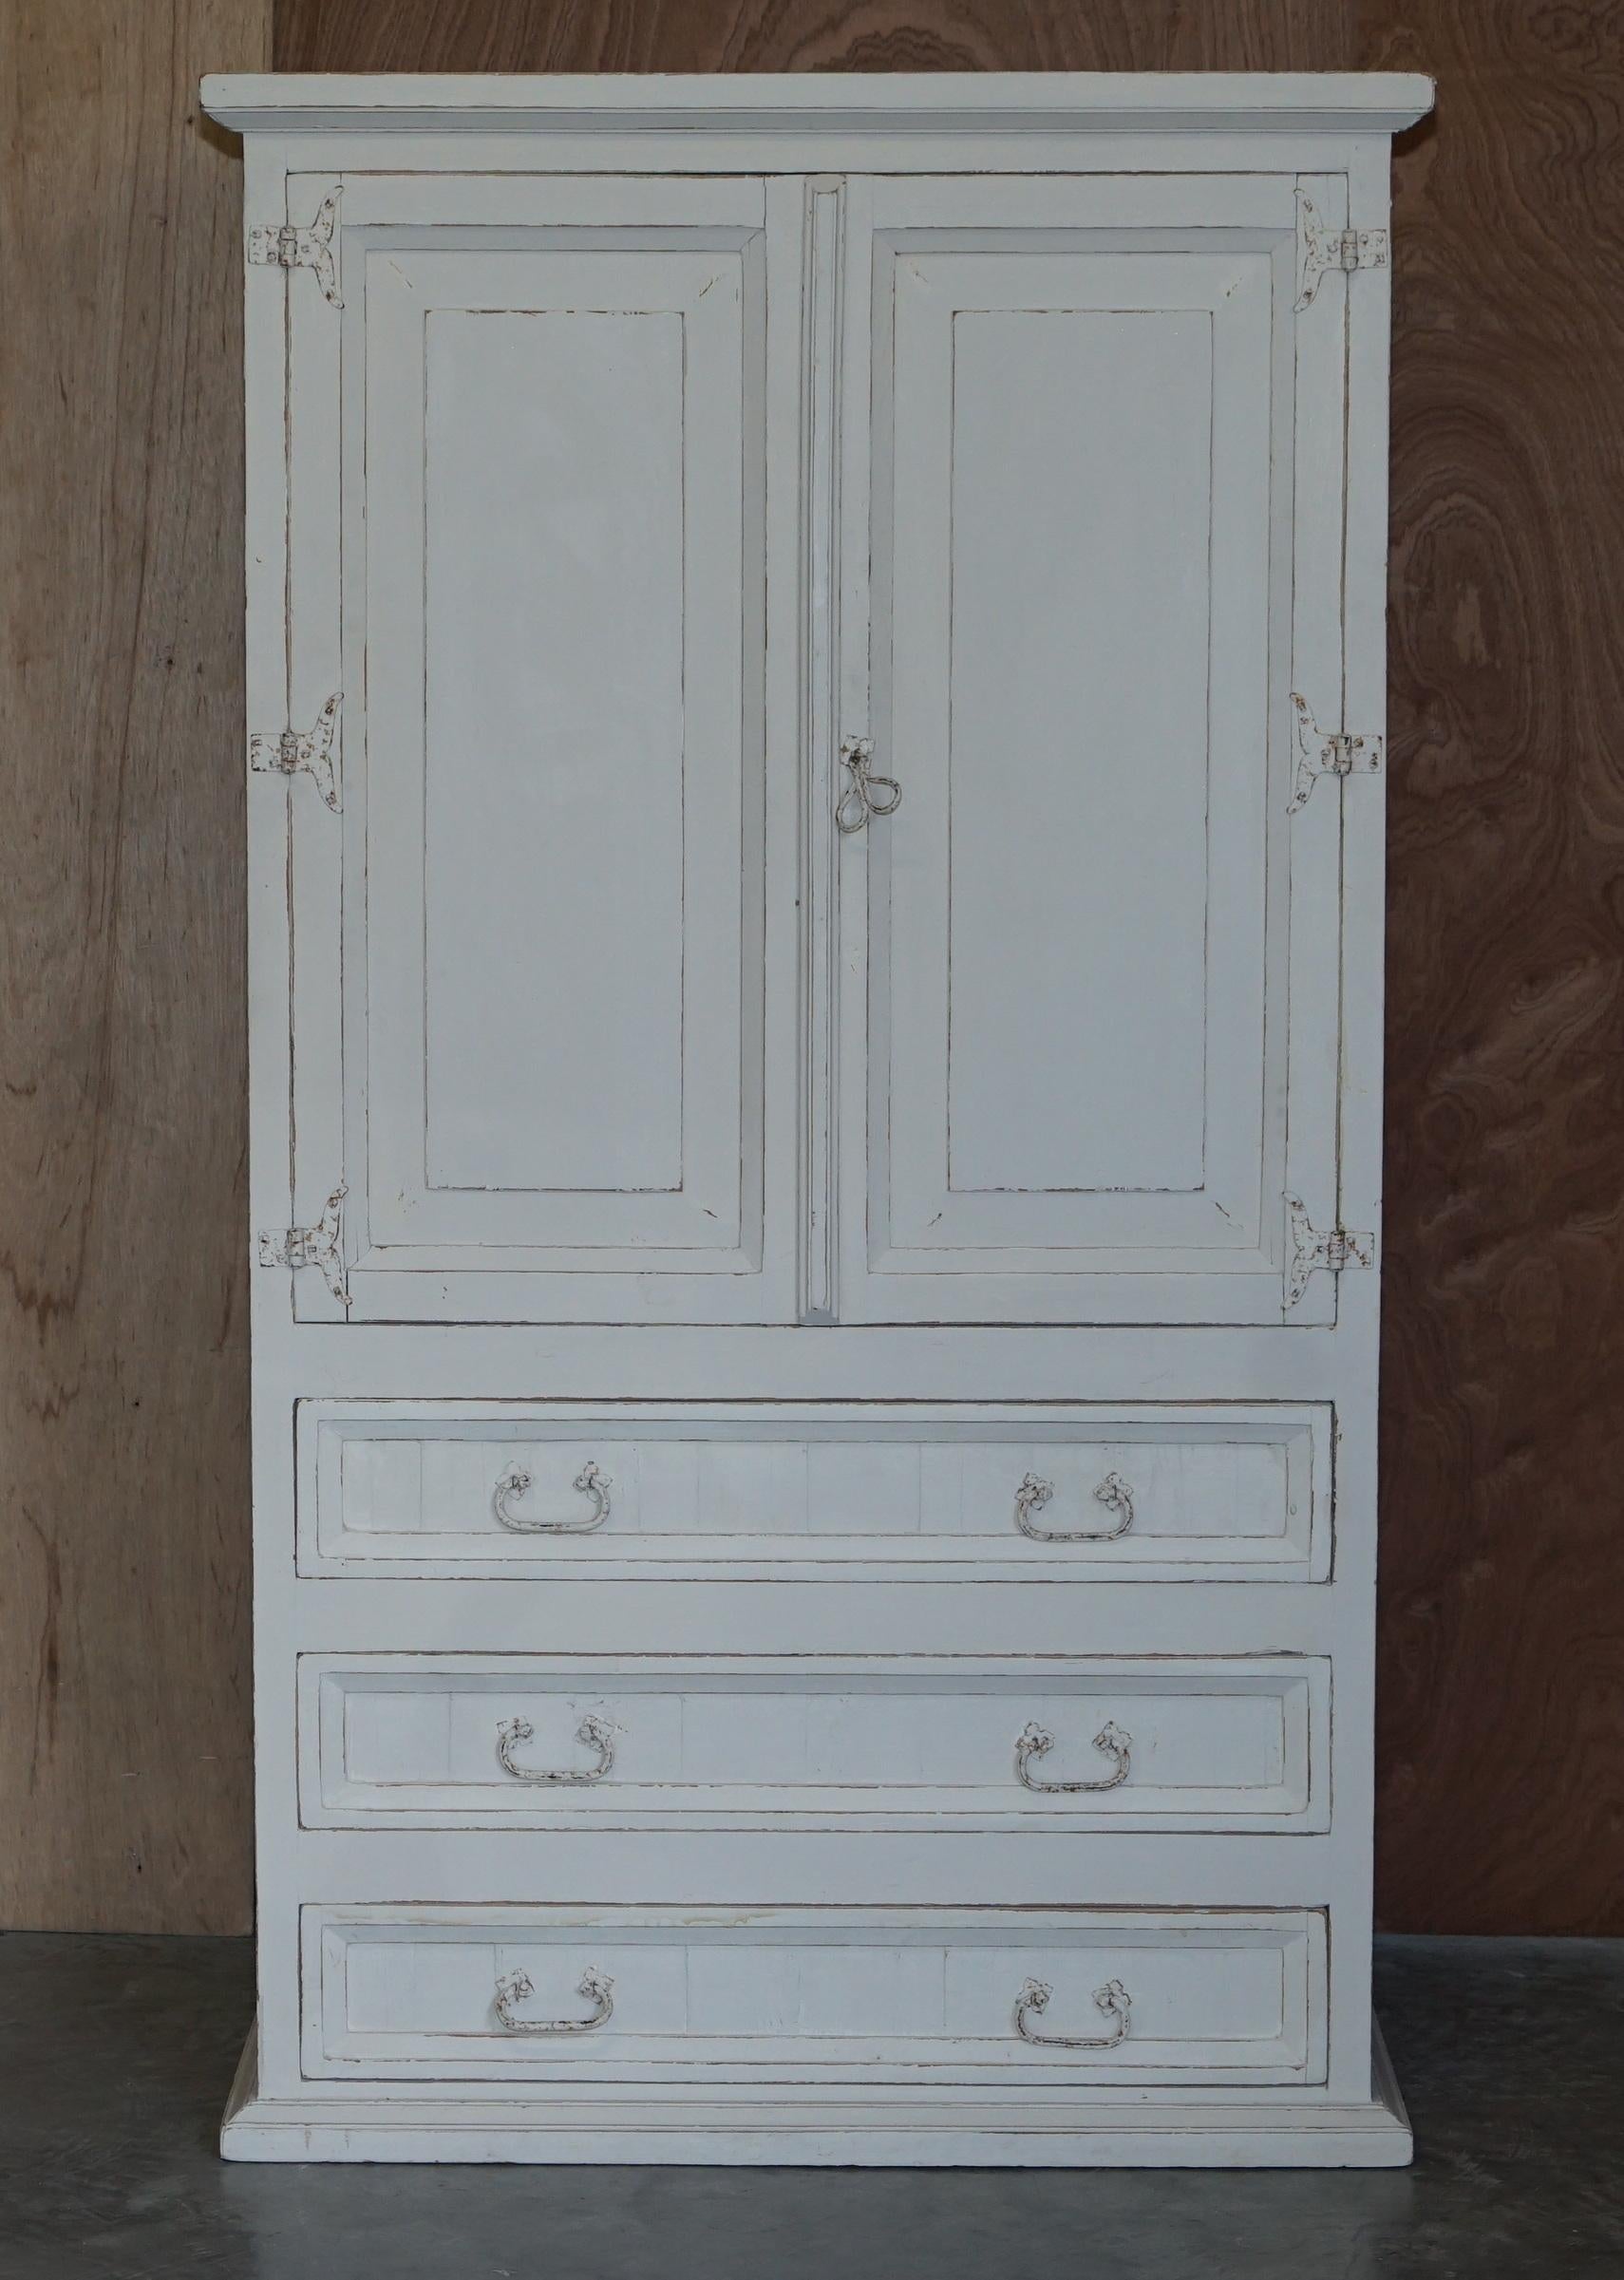 We are delighted to offer this lovely vintage English Country House hand painted wardrobe on chest of drawers

A very good looking and well made piece, it is solid, the paint is nicely aged and has that wonderful French farmhouse look and feel to